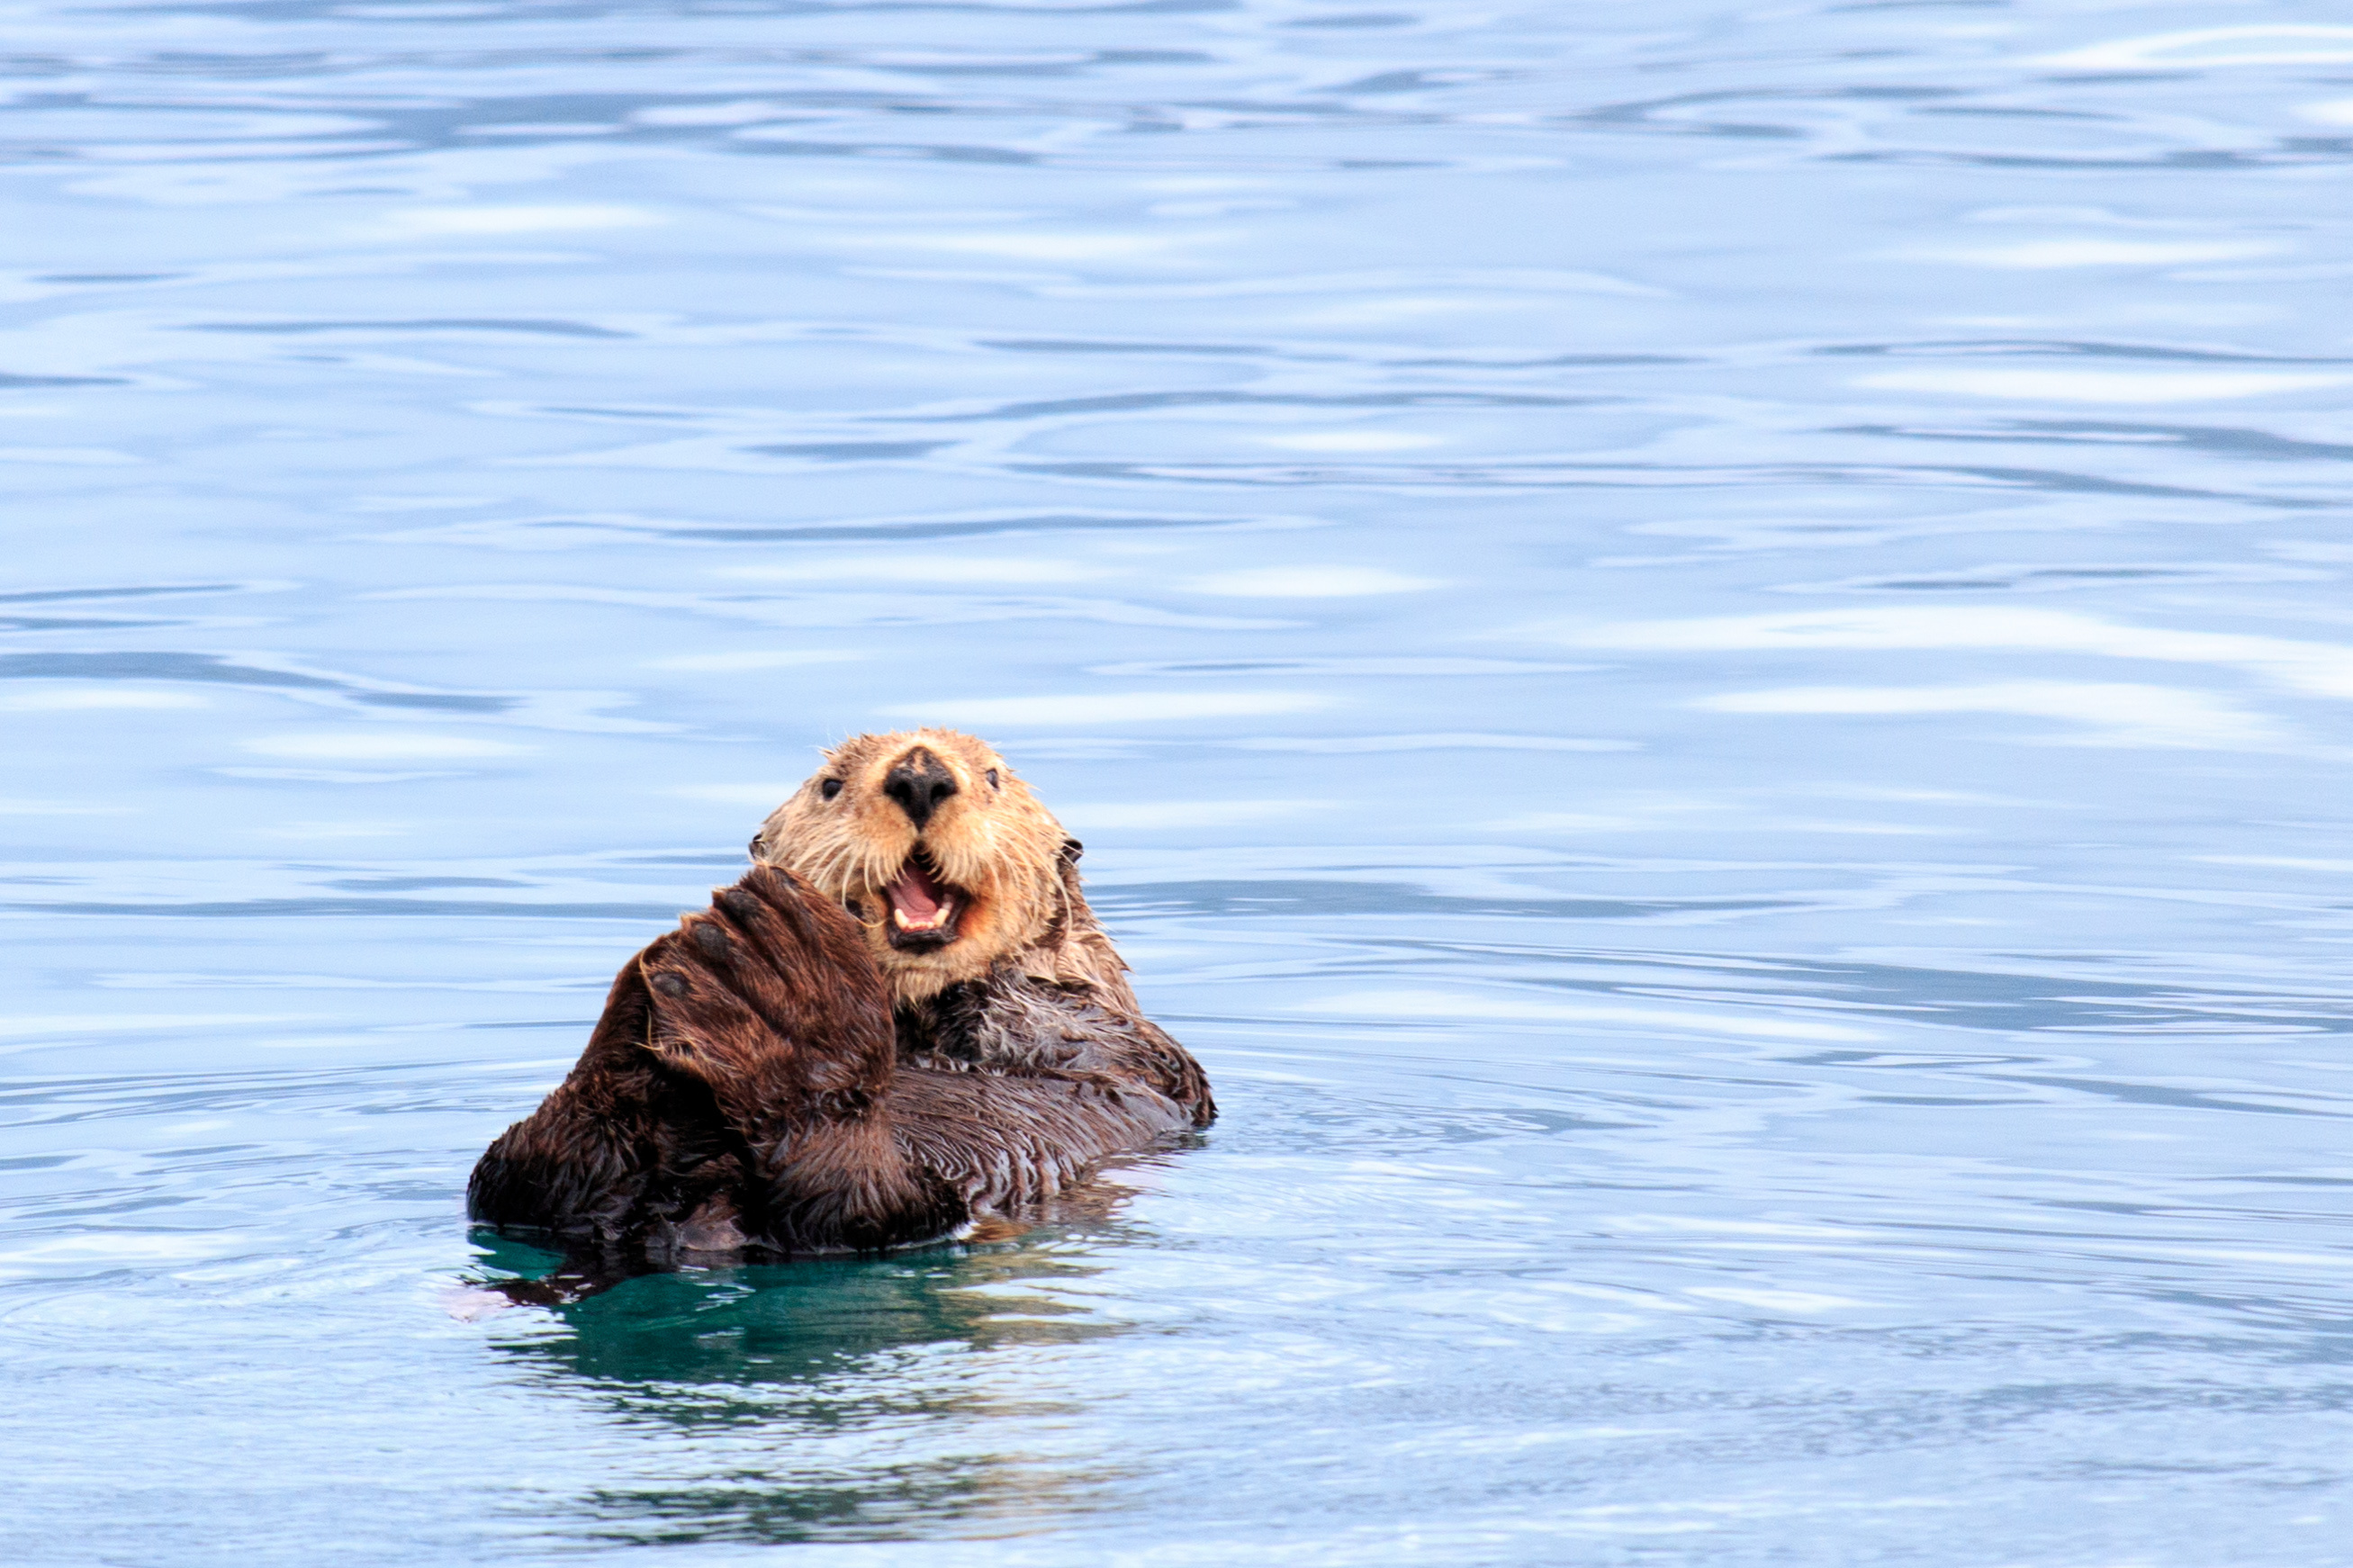 Get all the facts for Sea Otter Awareness Week